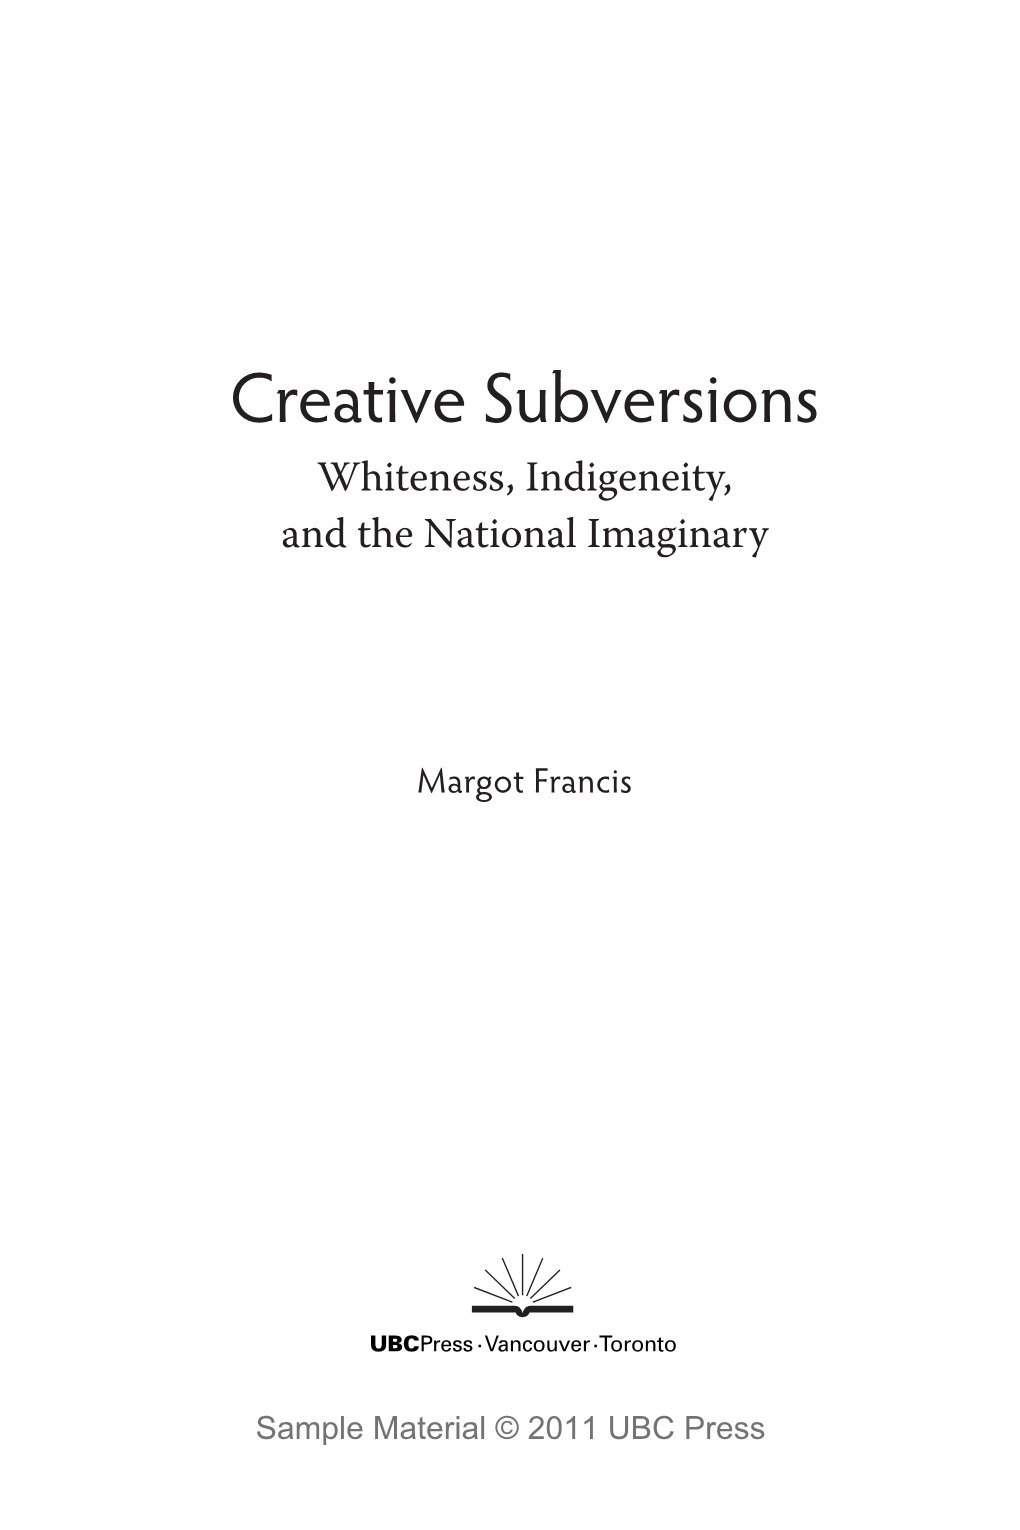 Creative Subversions Whiteness, Indigeneity, and the National Imaginary